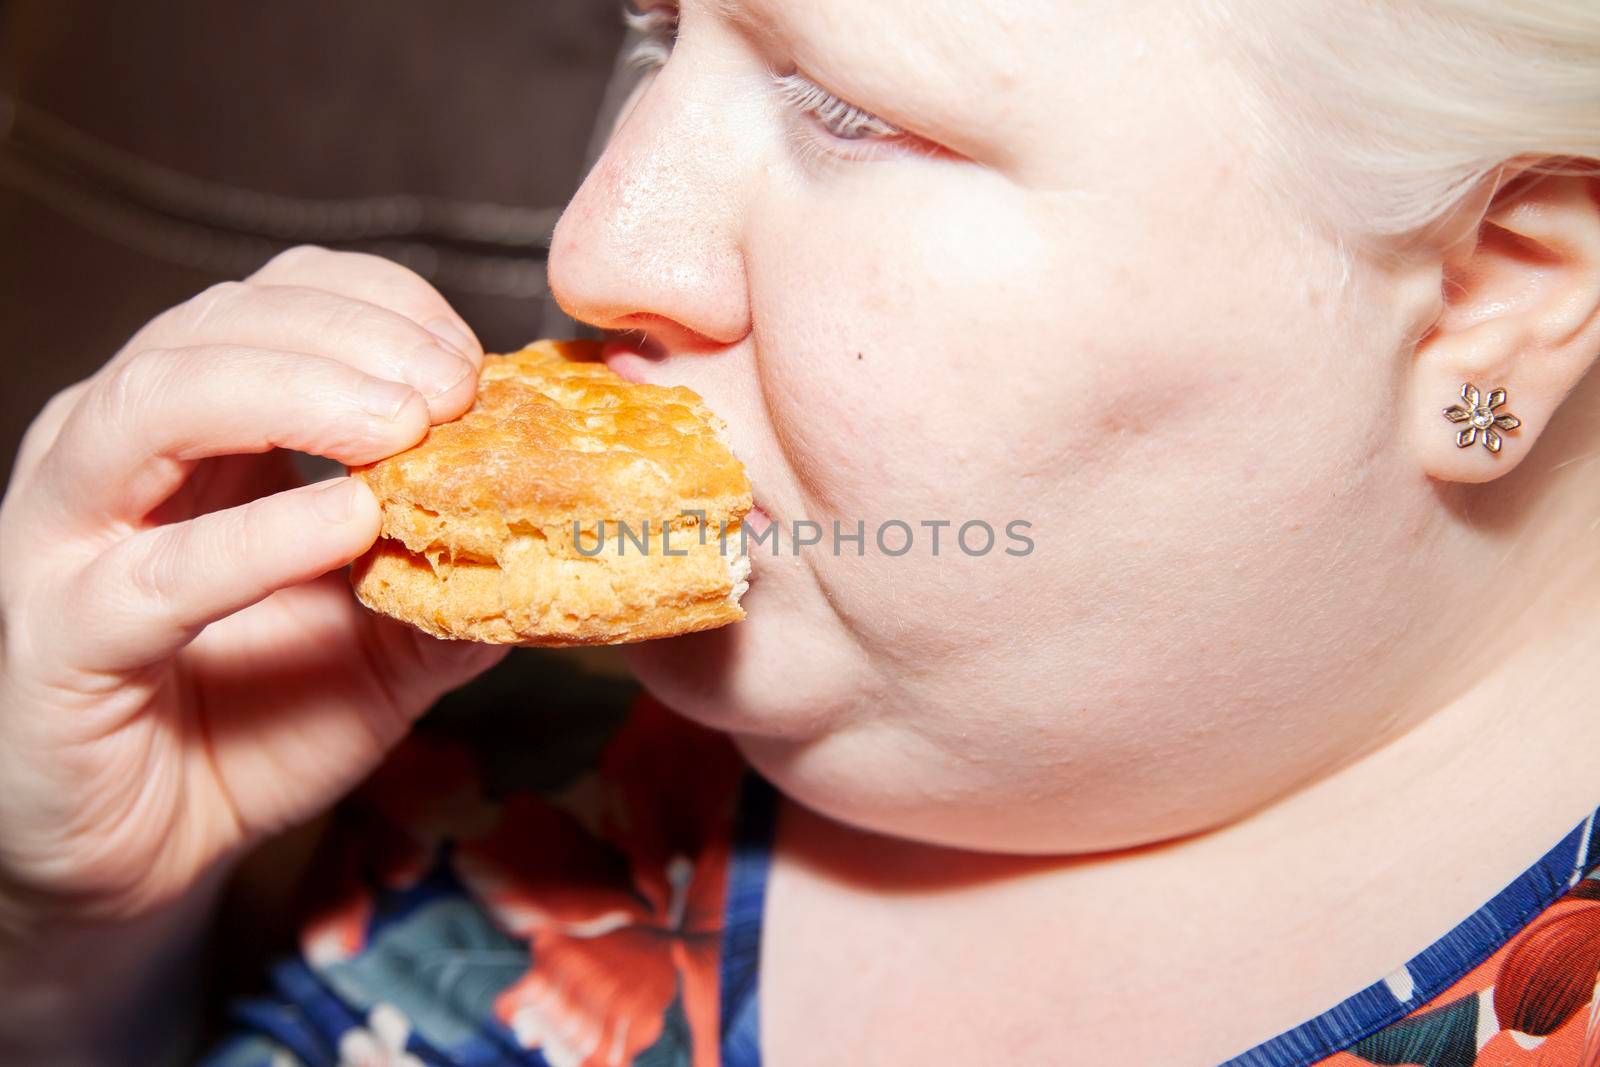 Woman Eating Buttermilk Biscuit by tornado98